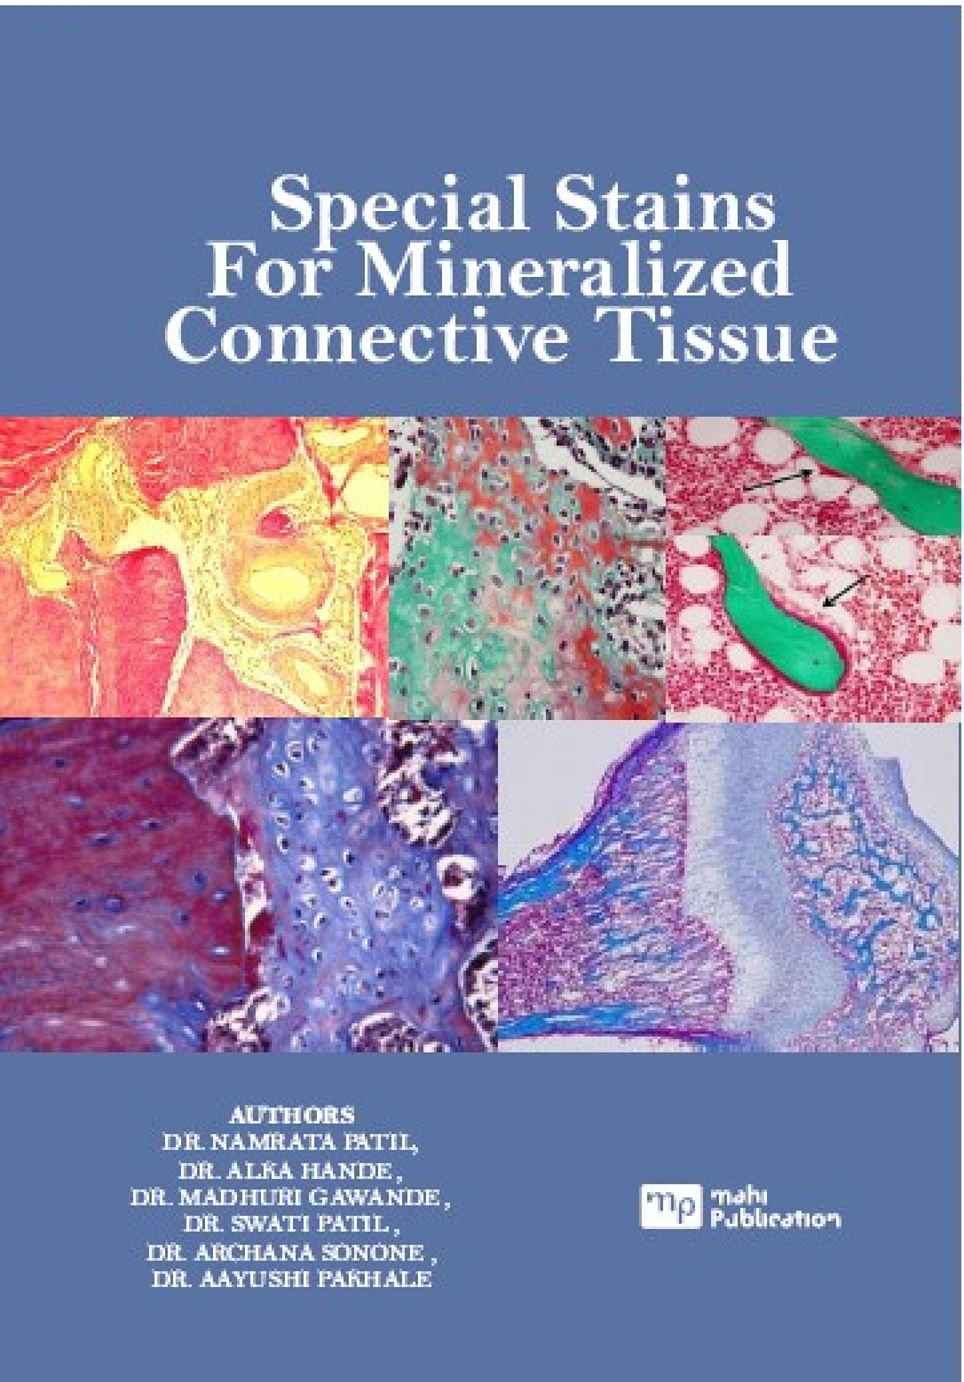 Special Stains for Mineralized Connective Tissue